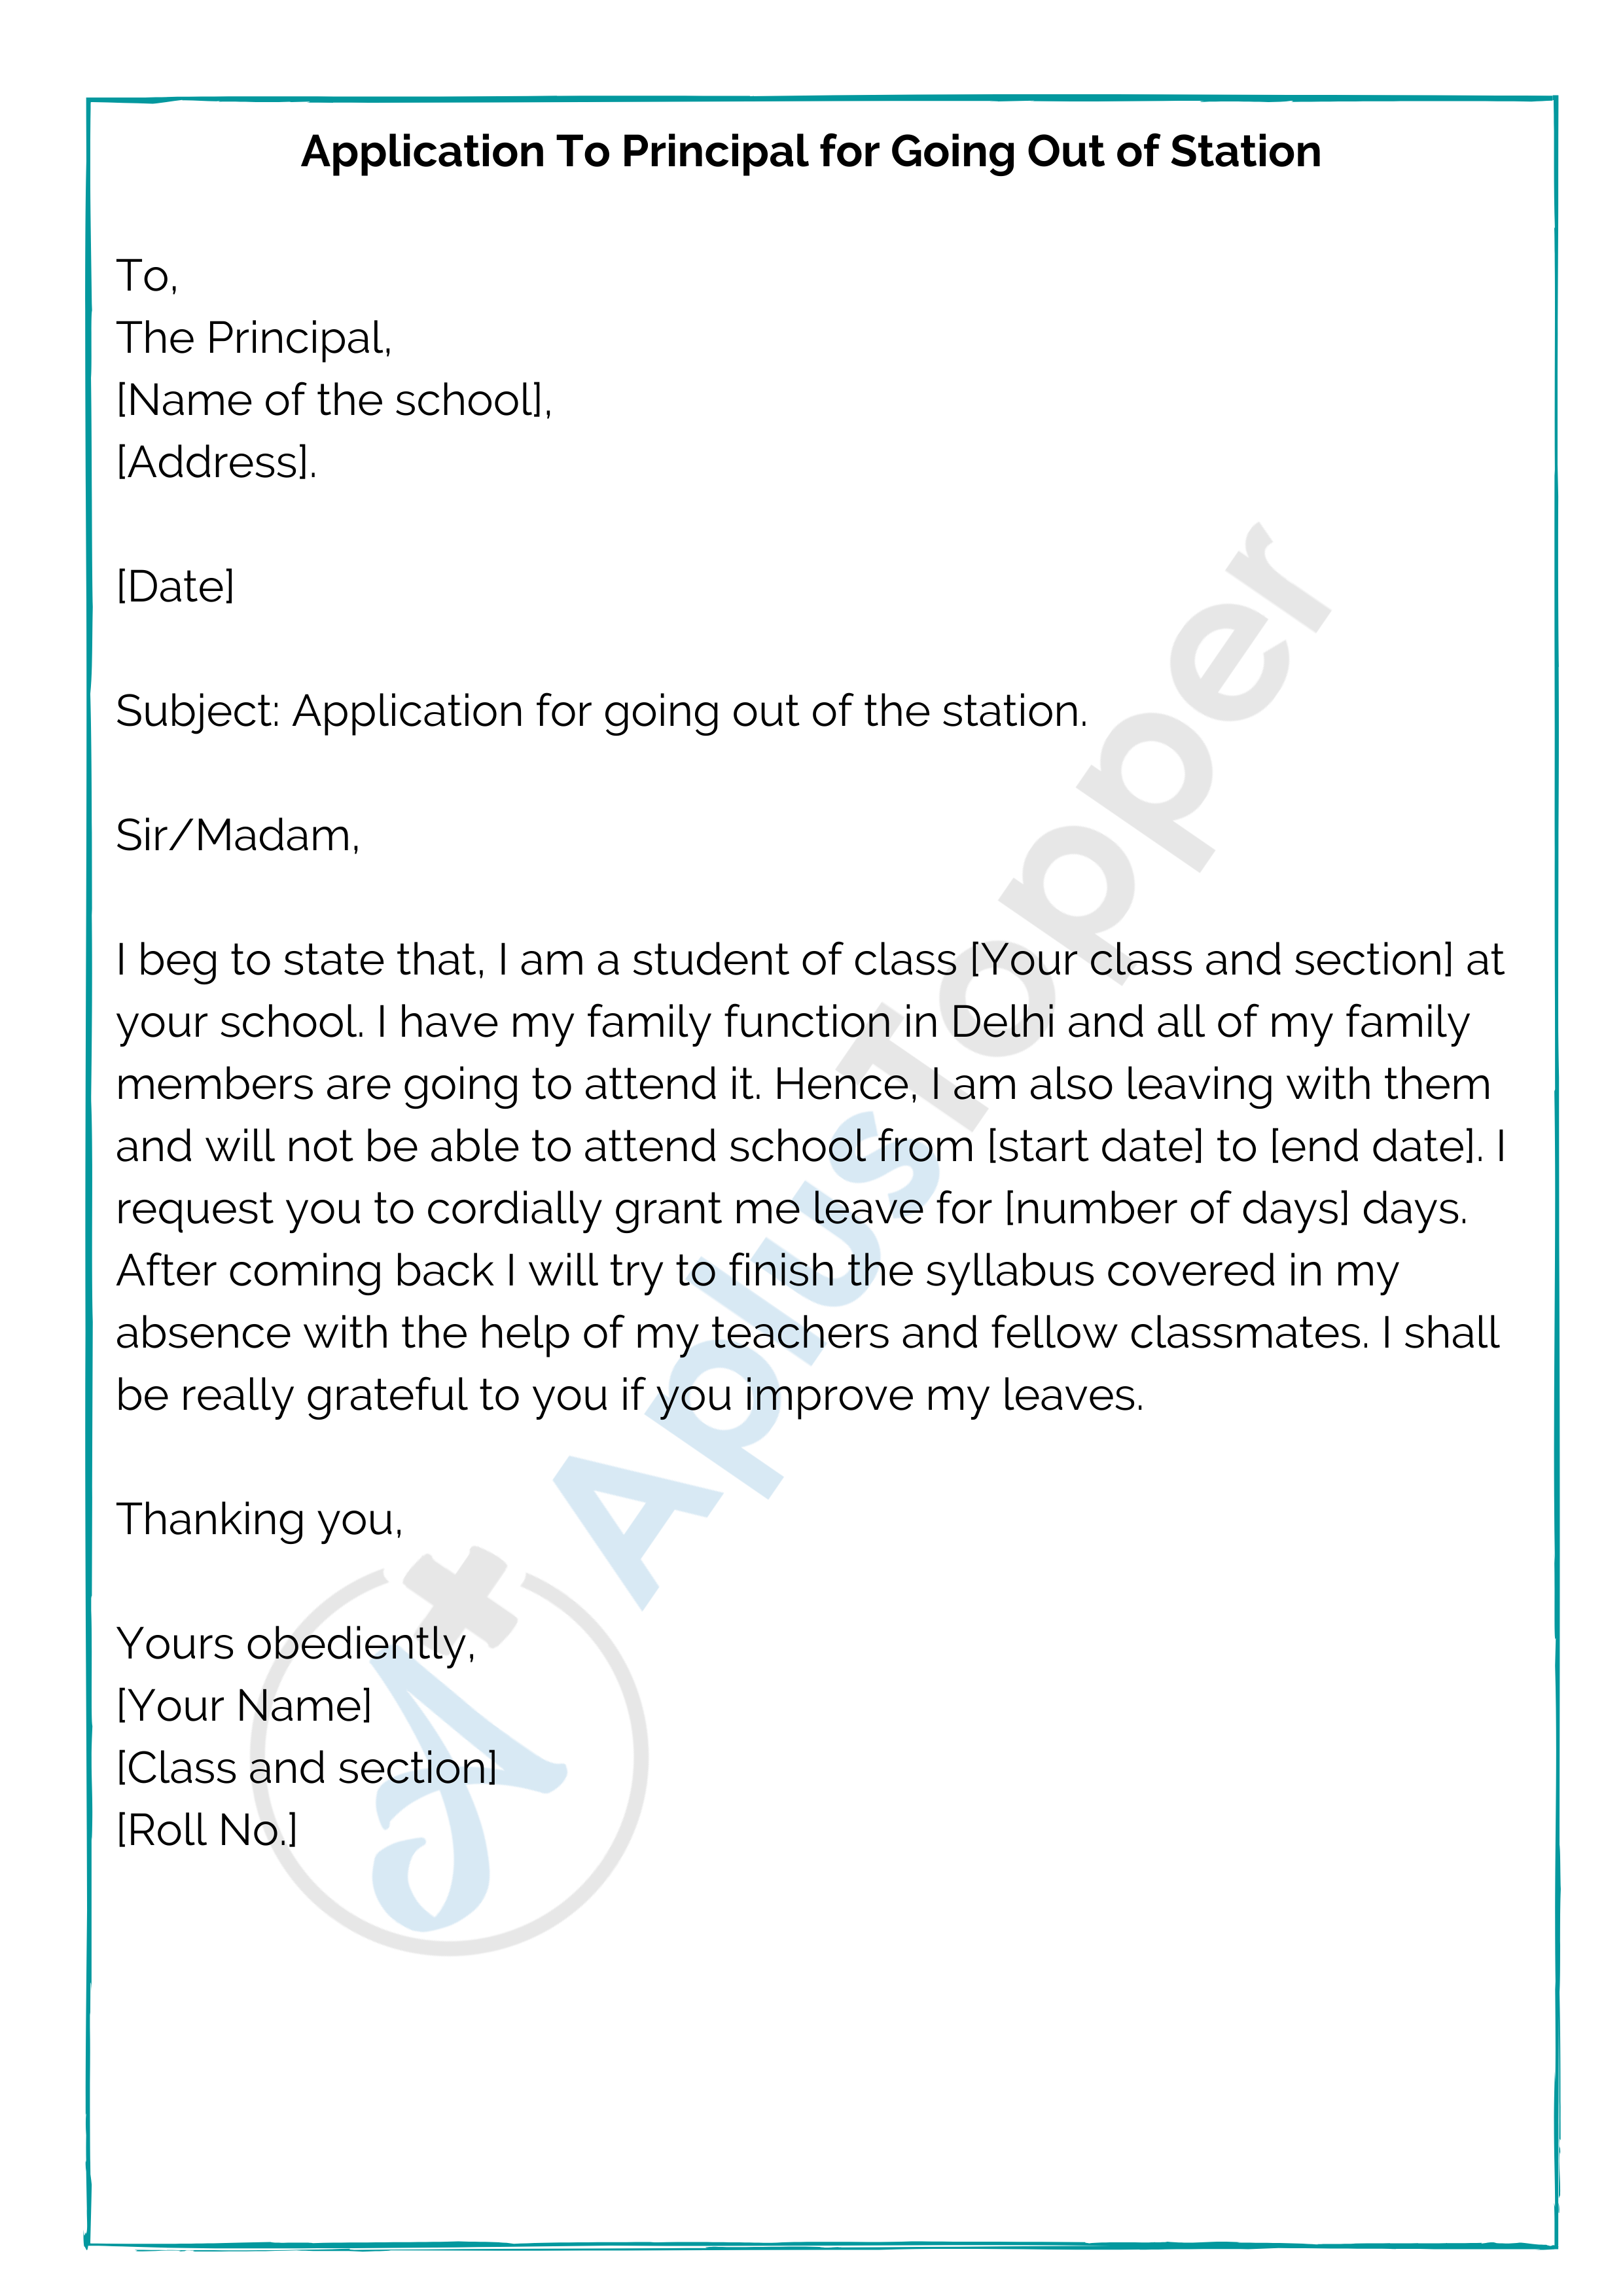 Application To Principal  How To Write an Application To College